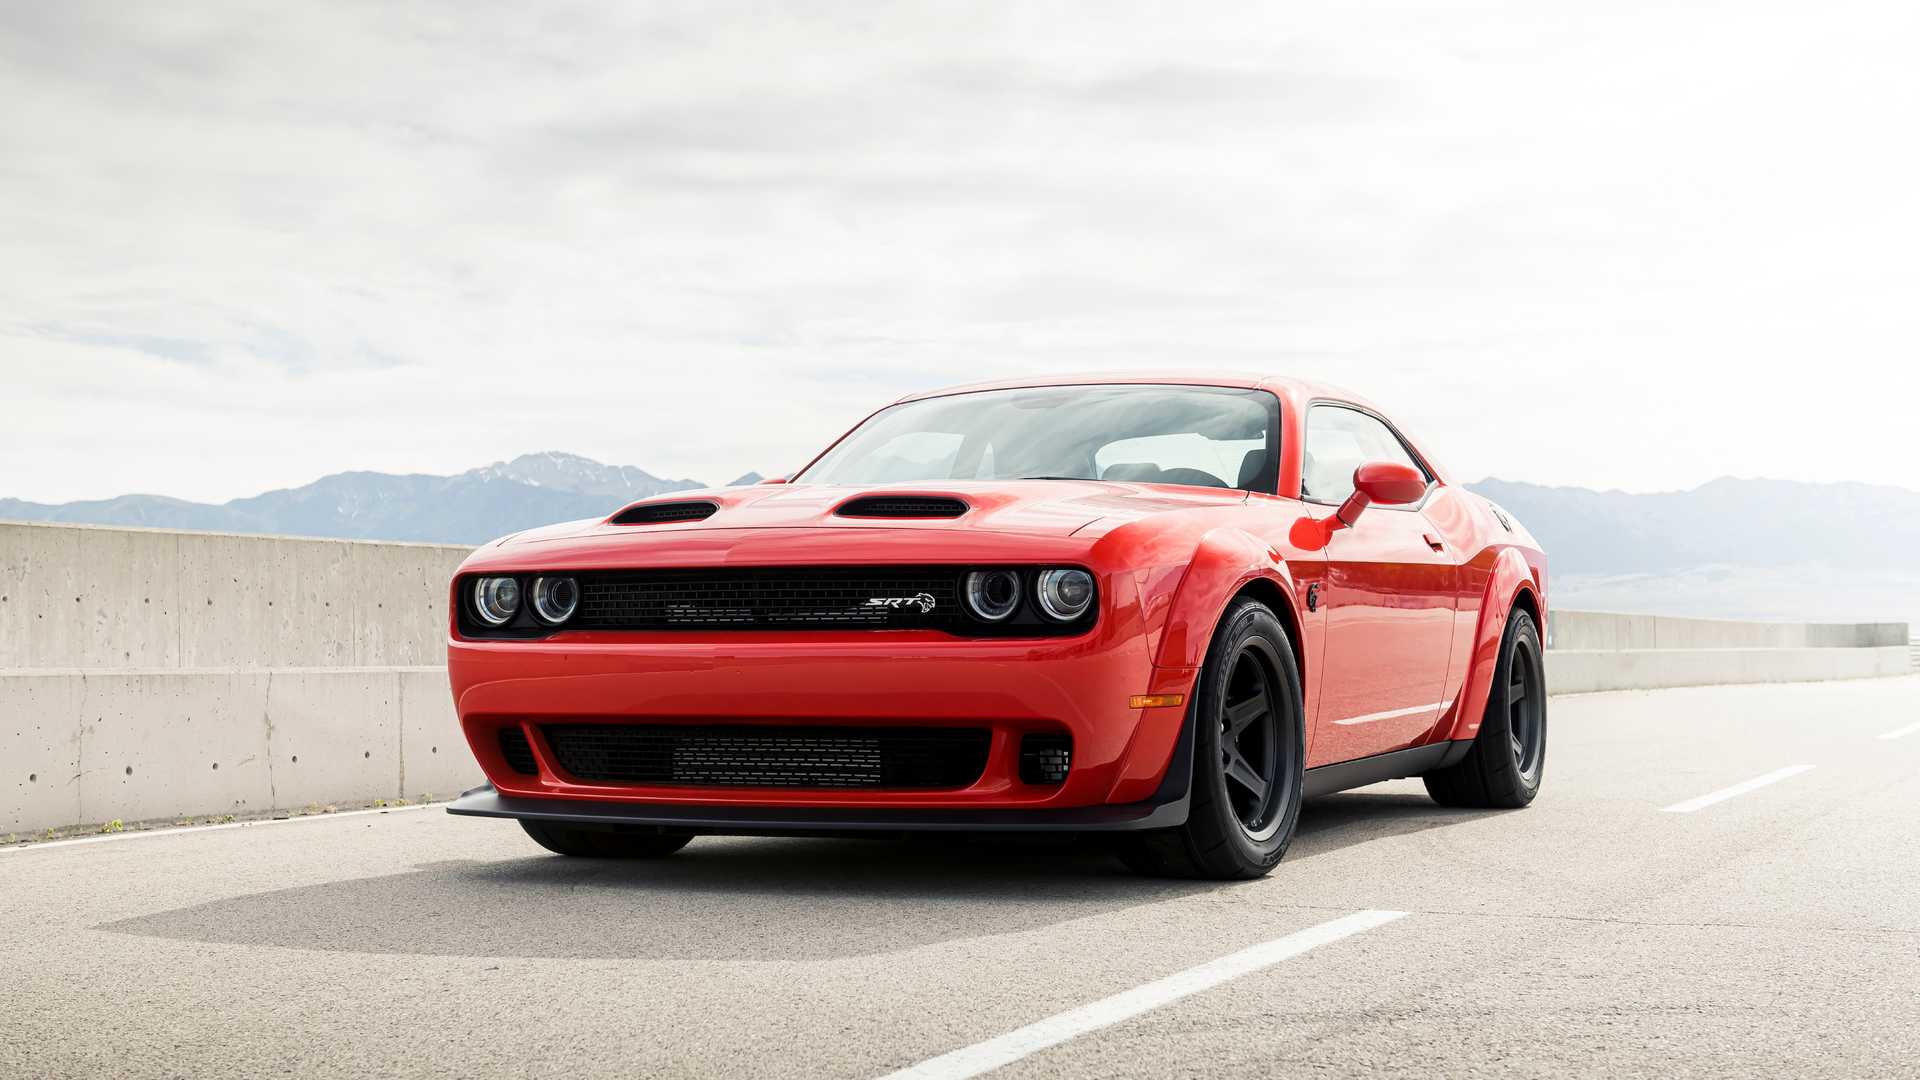 Dodge SRT Super Stock Challenger: 16 Things You Didn't Know!